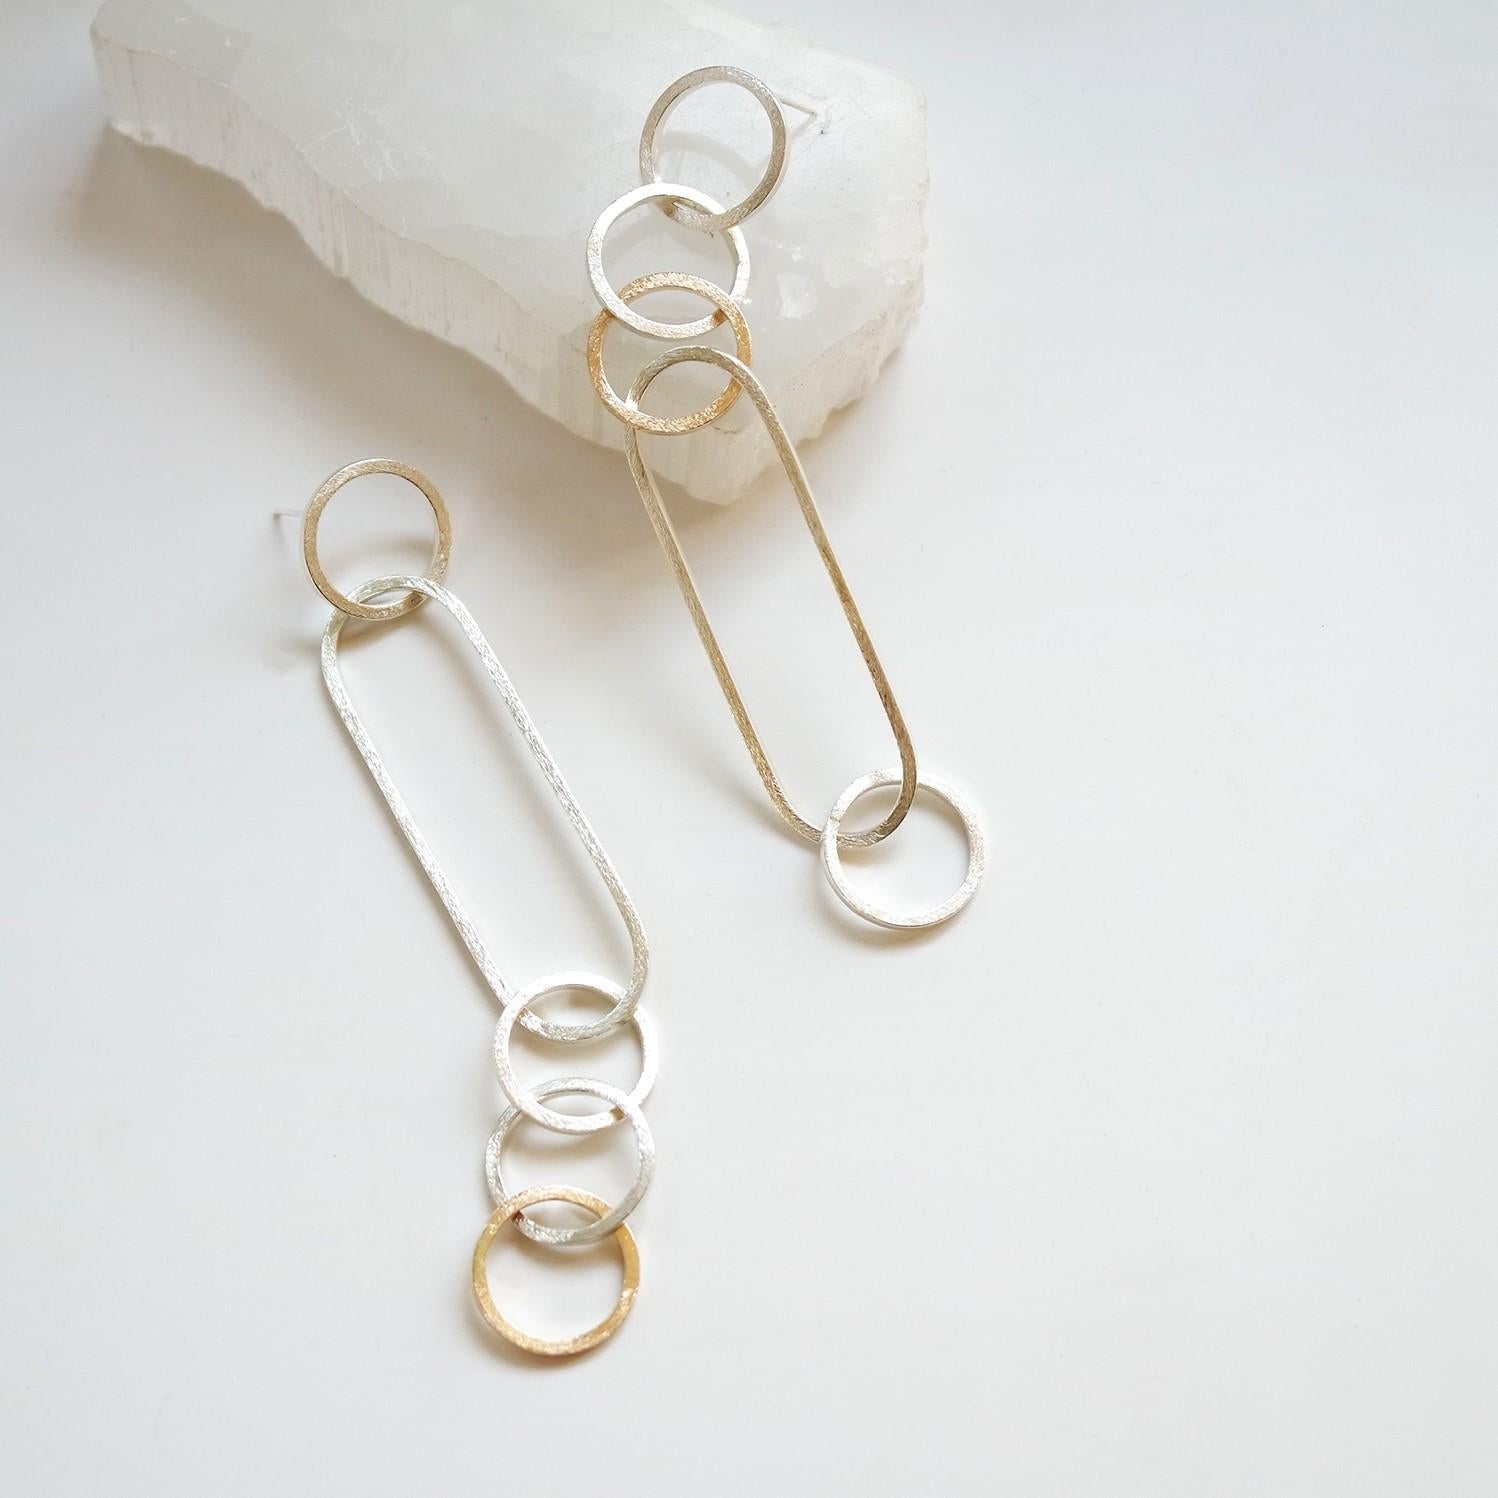 The Interlink Earrings were designed with strength, unity, and community in mind. Wear these earrings from day to night life as they transition smoothly from office to evening dress!

Meticulously handcrafted using recycled precious metals of thick